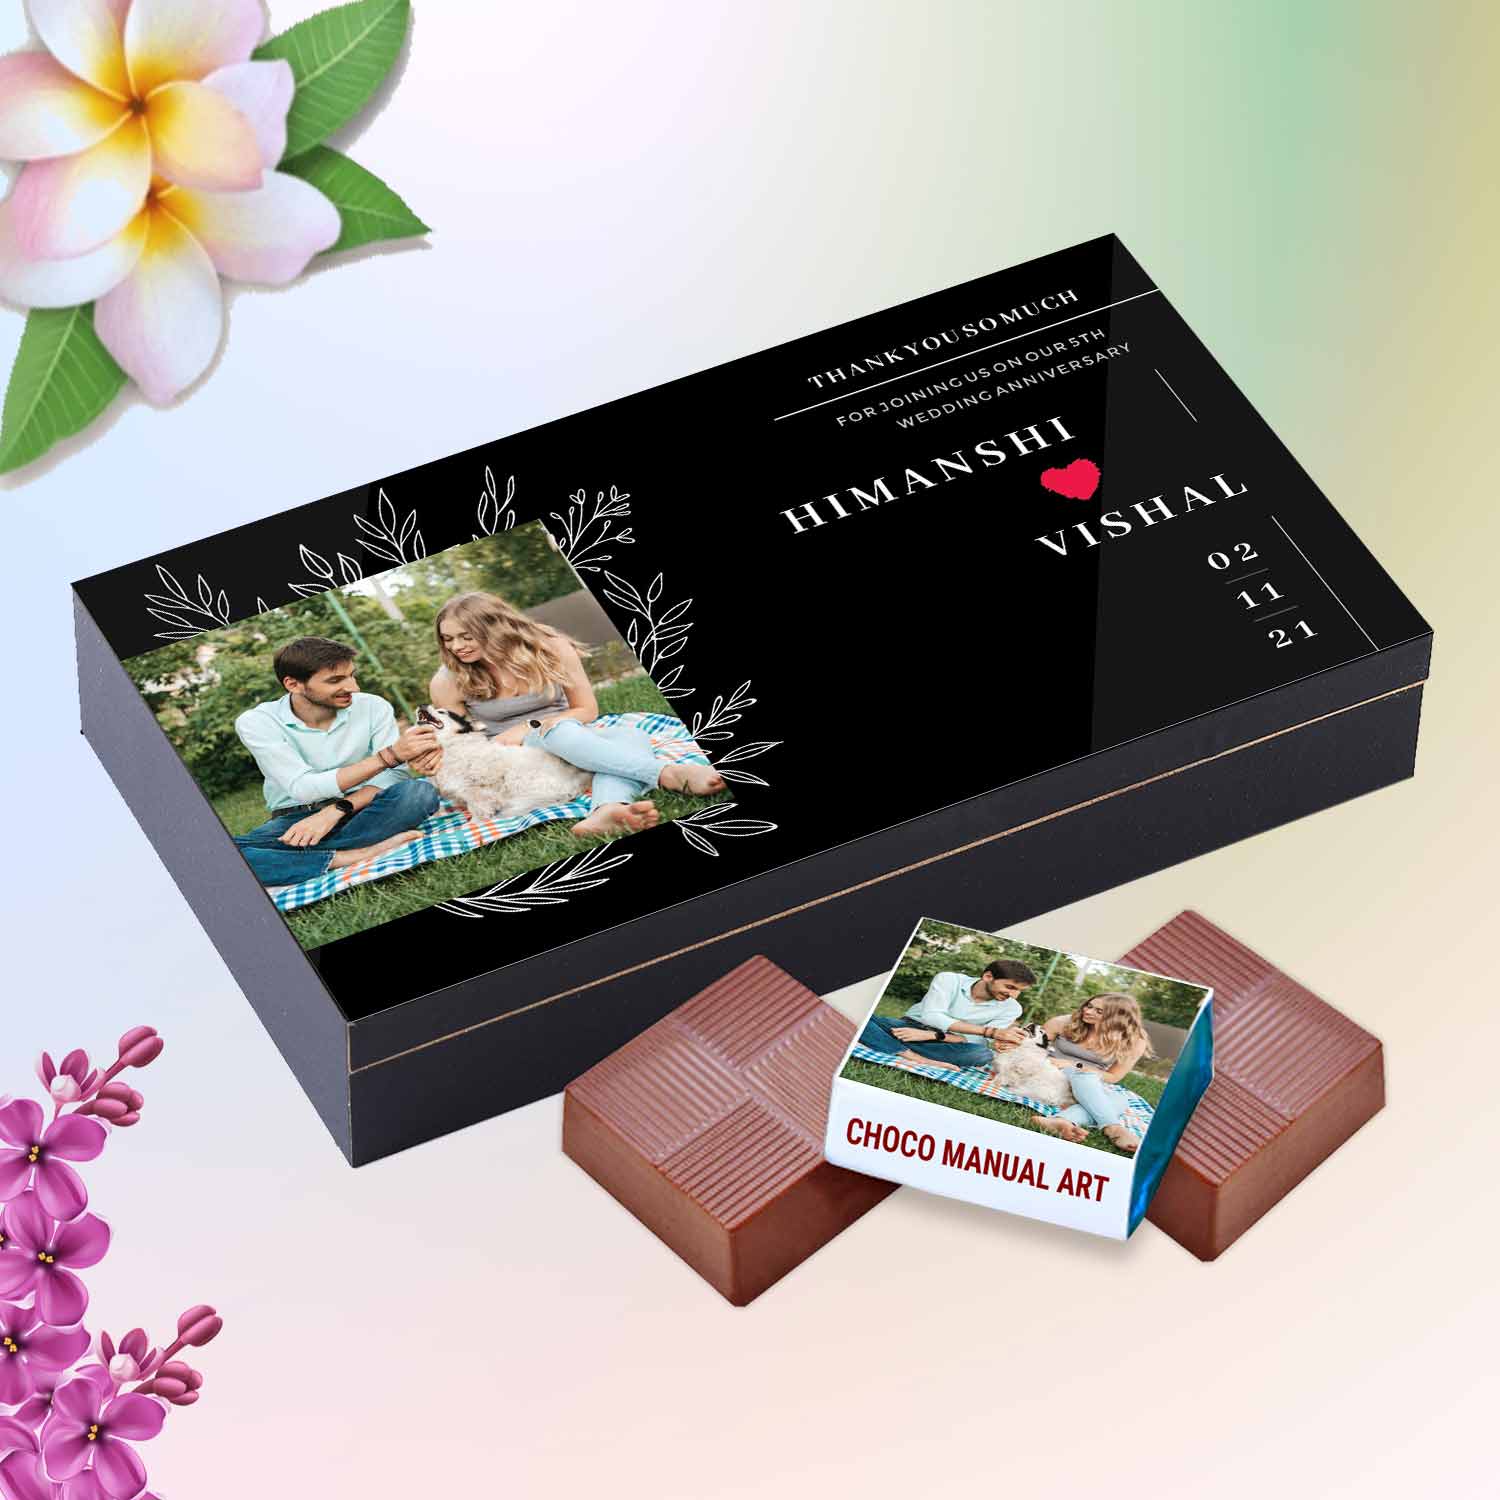 . Beautiful Personalised Box Customised elegant wooden gift boxes personalized with your name and photo